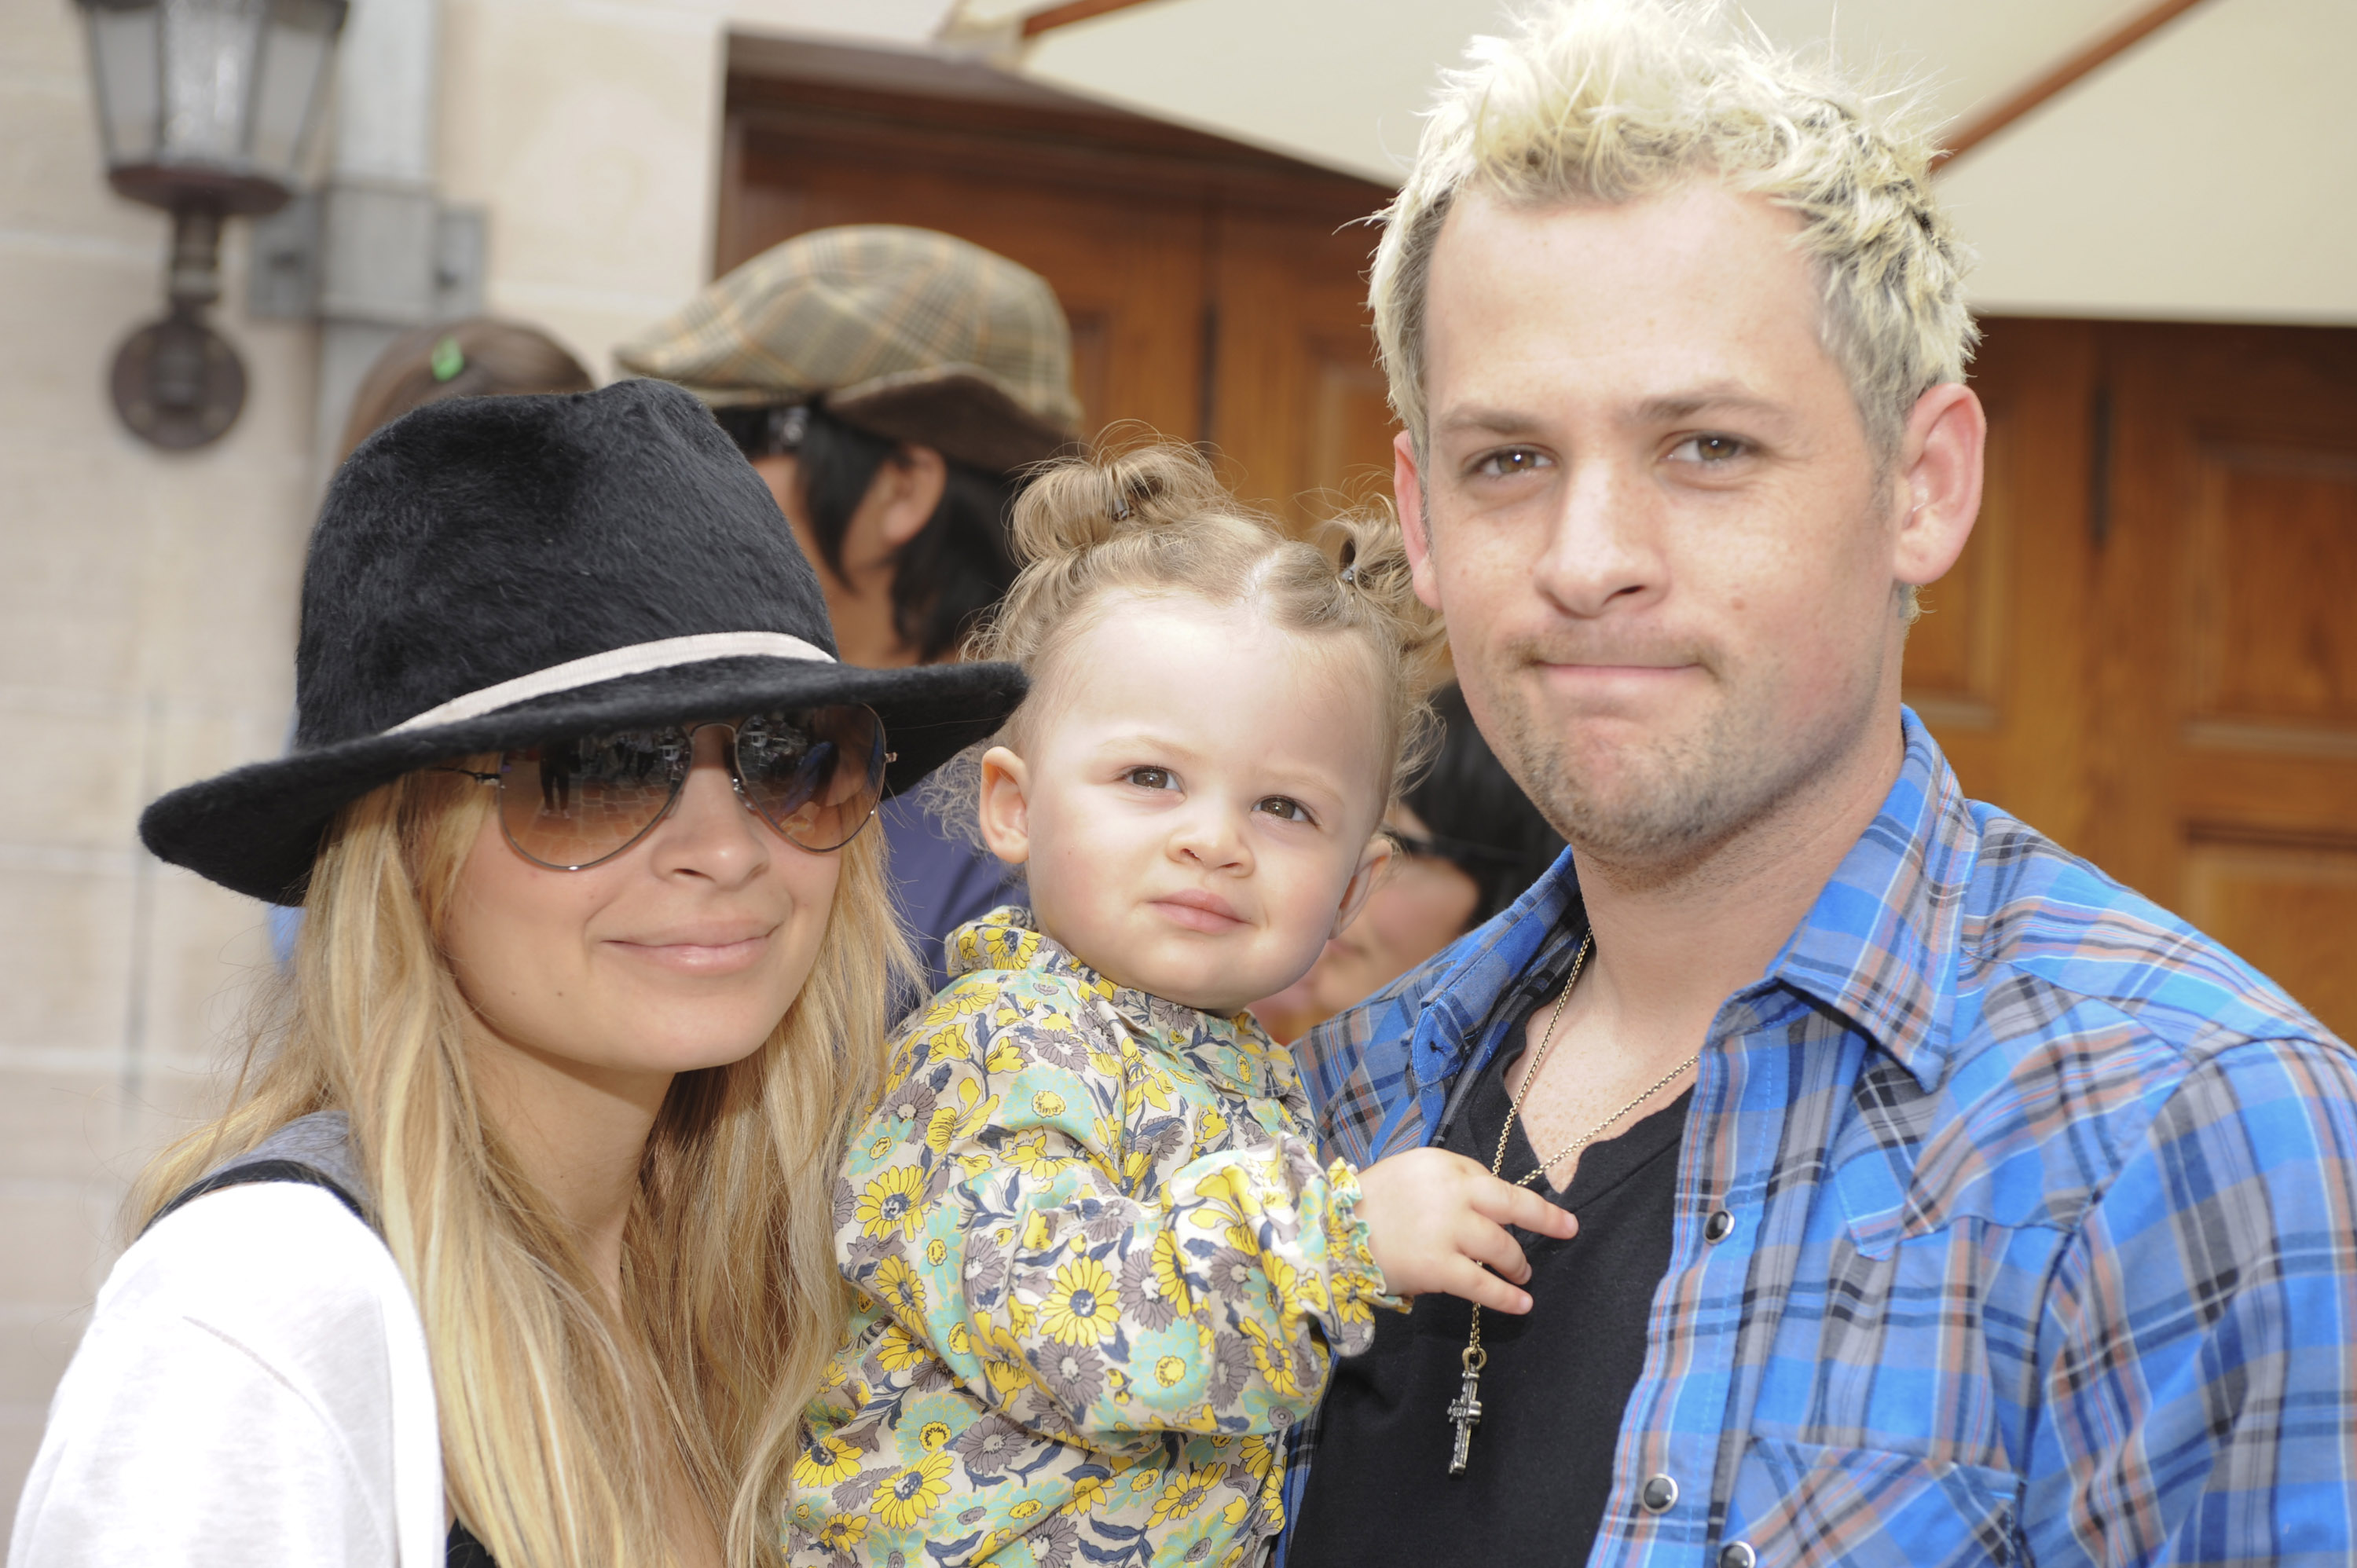 Nicole Richie, Harlow Madden and Joel Madden at The 3rd Annual Kidstock Music and Arts Festival at Greystone Mansion on May 31, 2009 in Beverly Hills, California. | Source: Getty Images